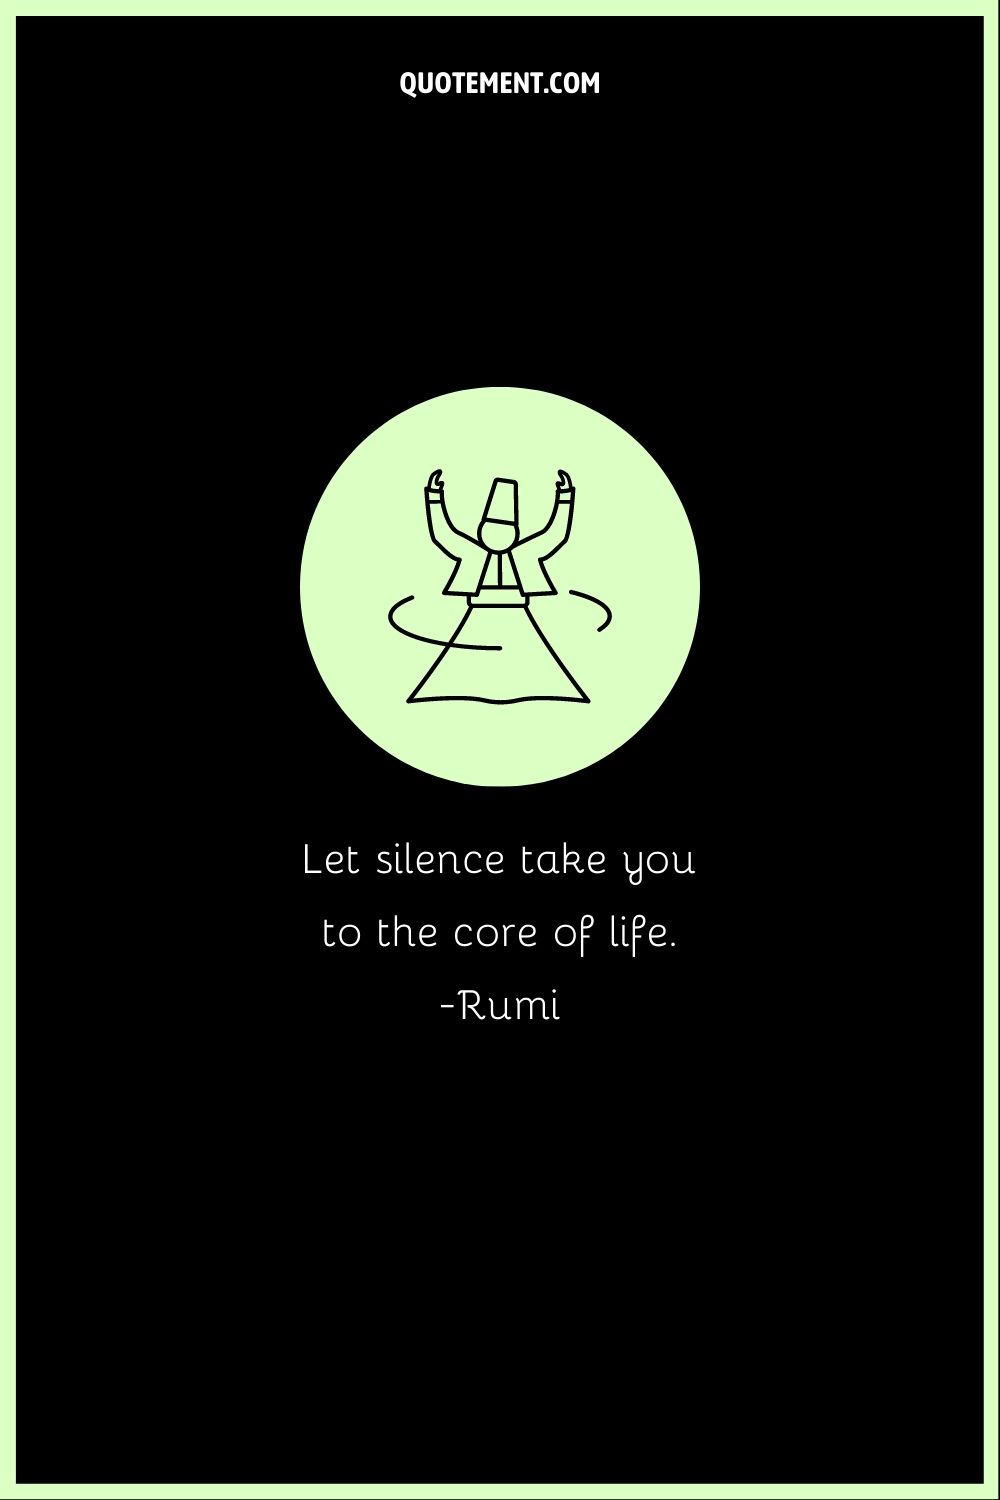 “Let silence take you to the core of life.” ― Rumi